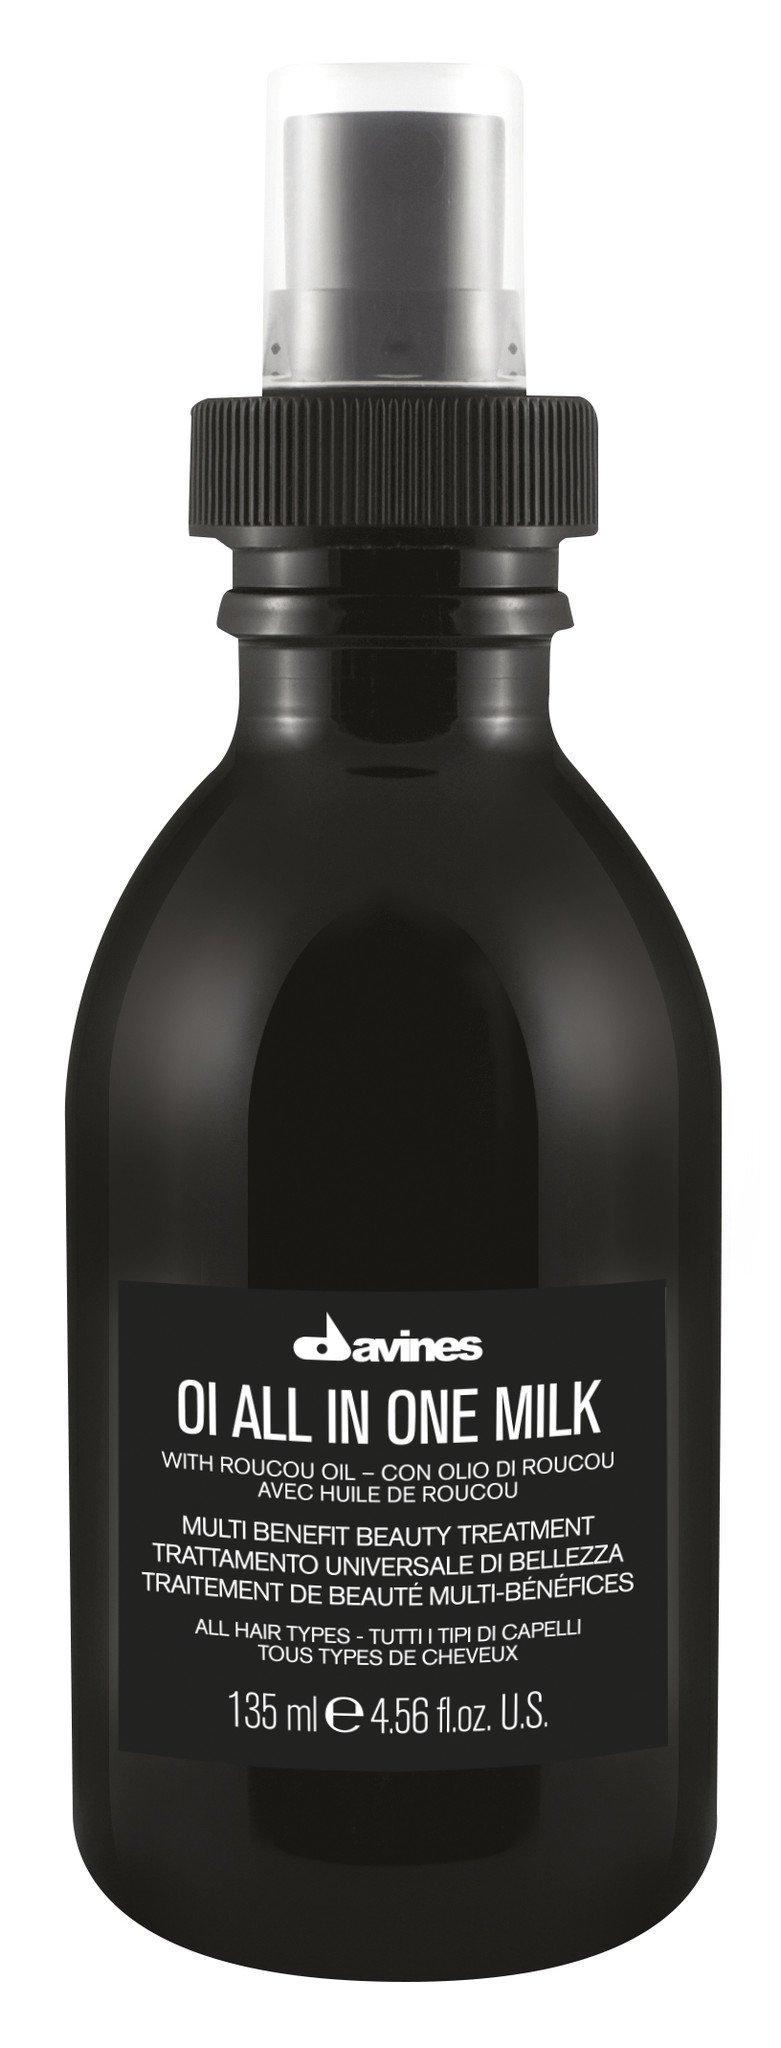 Oi: All In One Milk